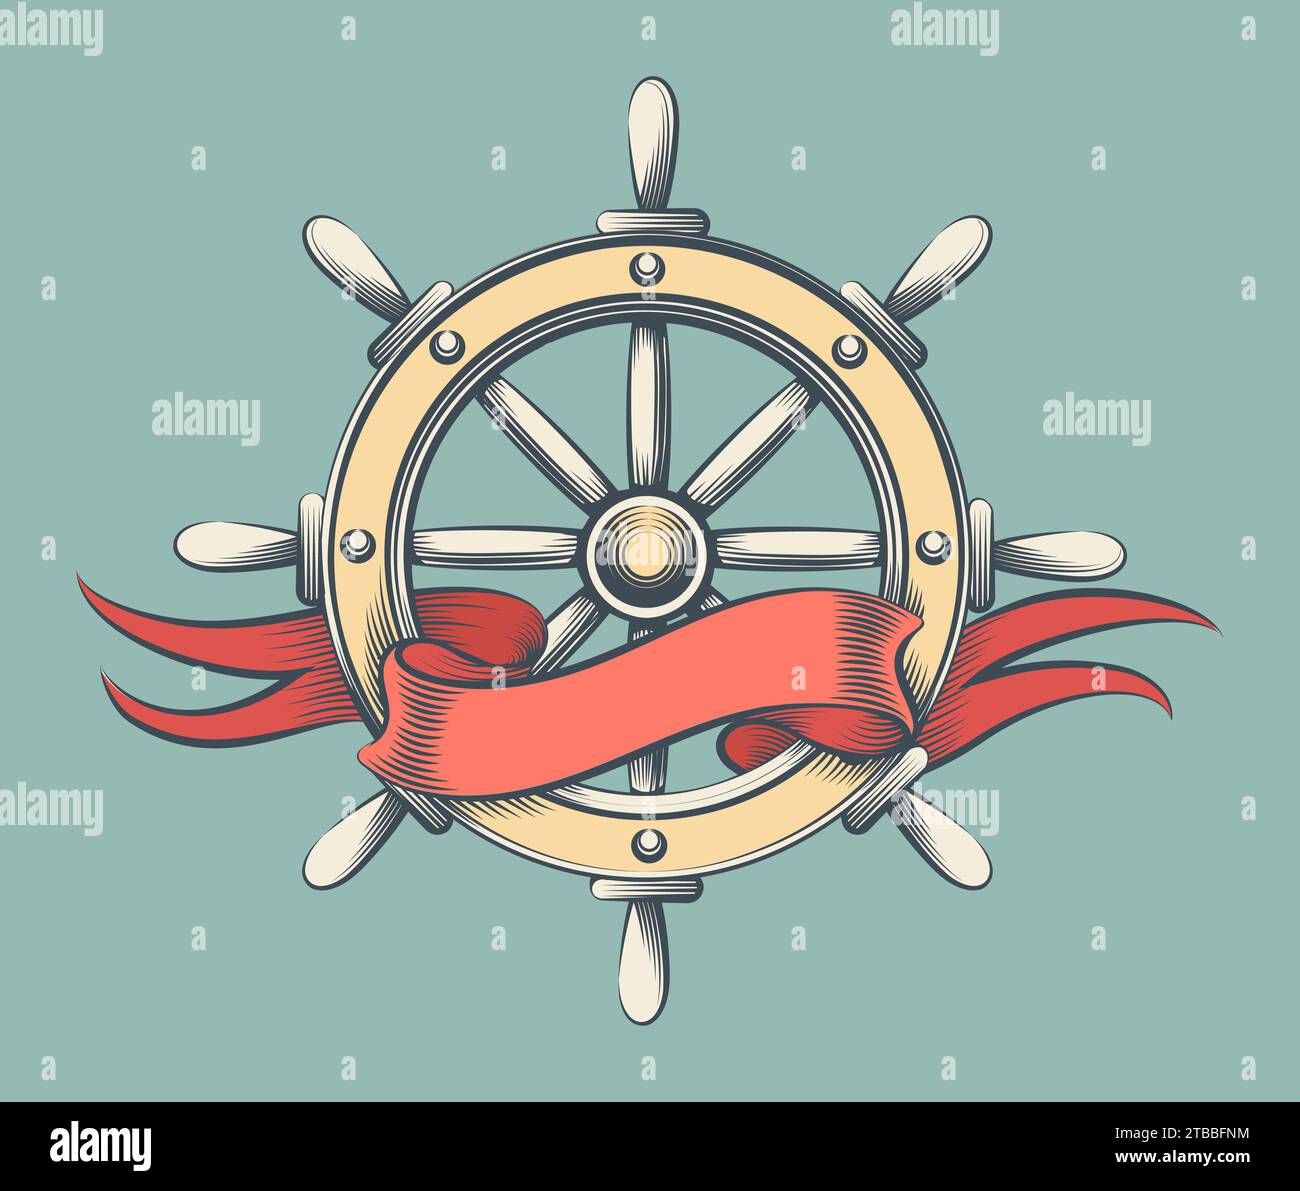 Hand Made Vintage Steering Wheel with Banner Drawn in Engraving Style. Vector Illustration. No AI was used. Stock Vector